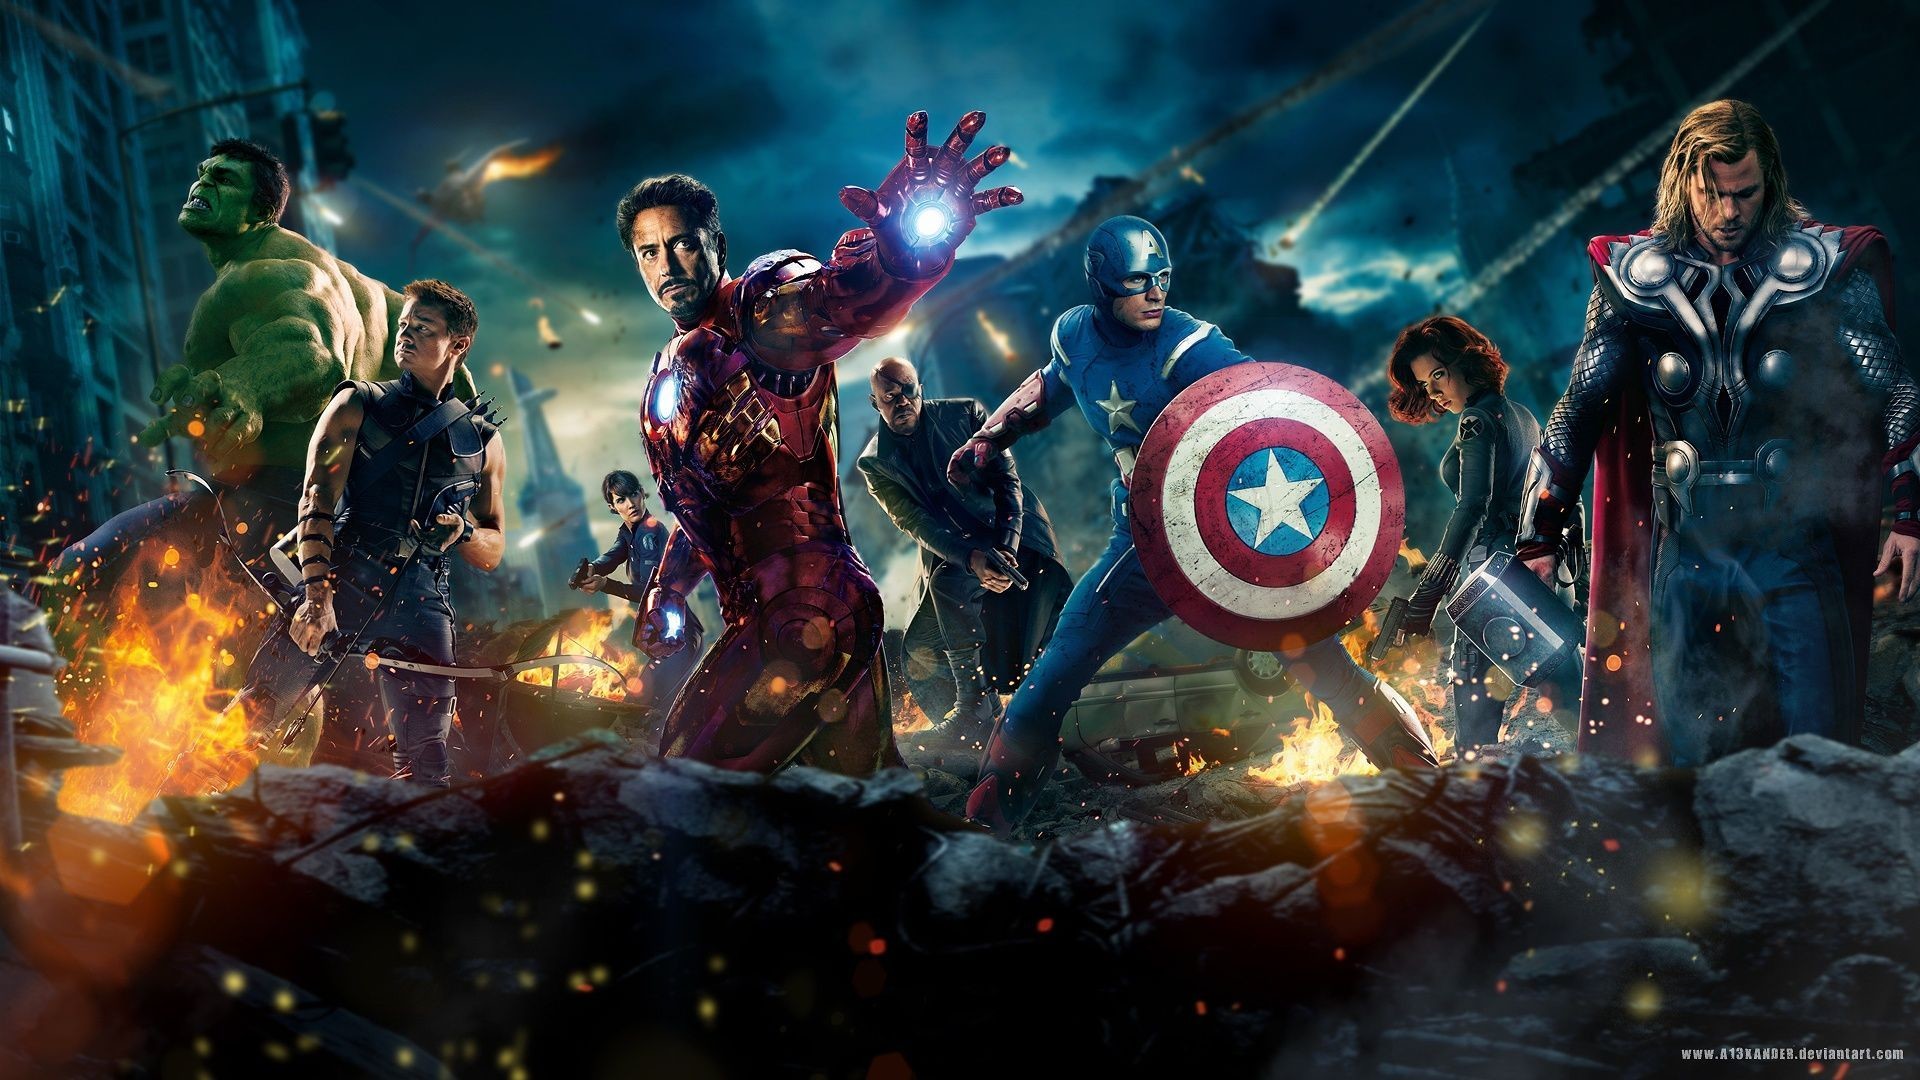 1920x1080 ... avengers hd wallpapers on wallpaperget com ...